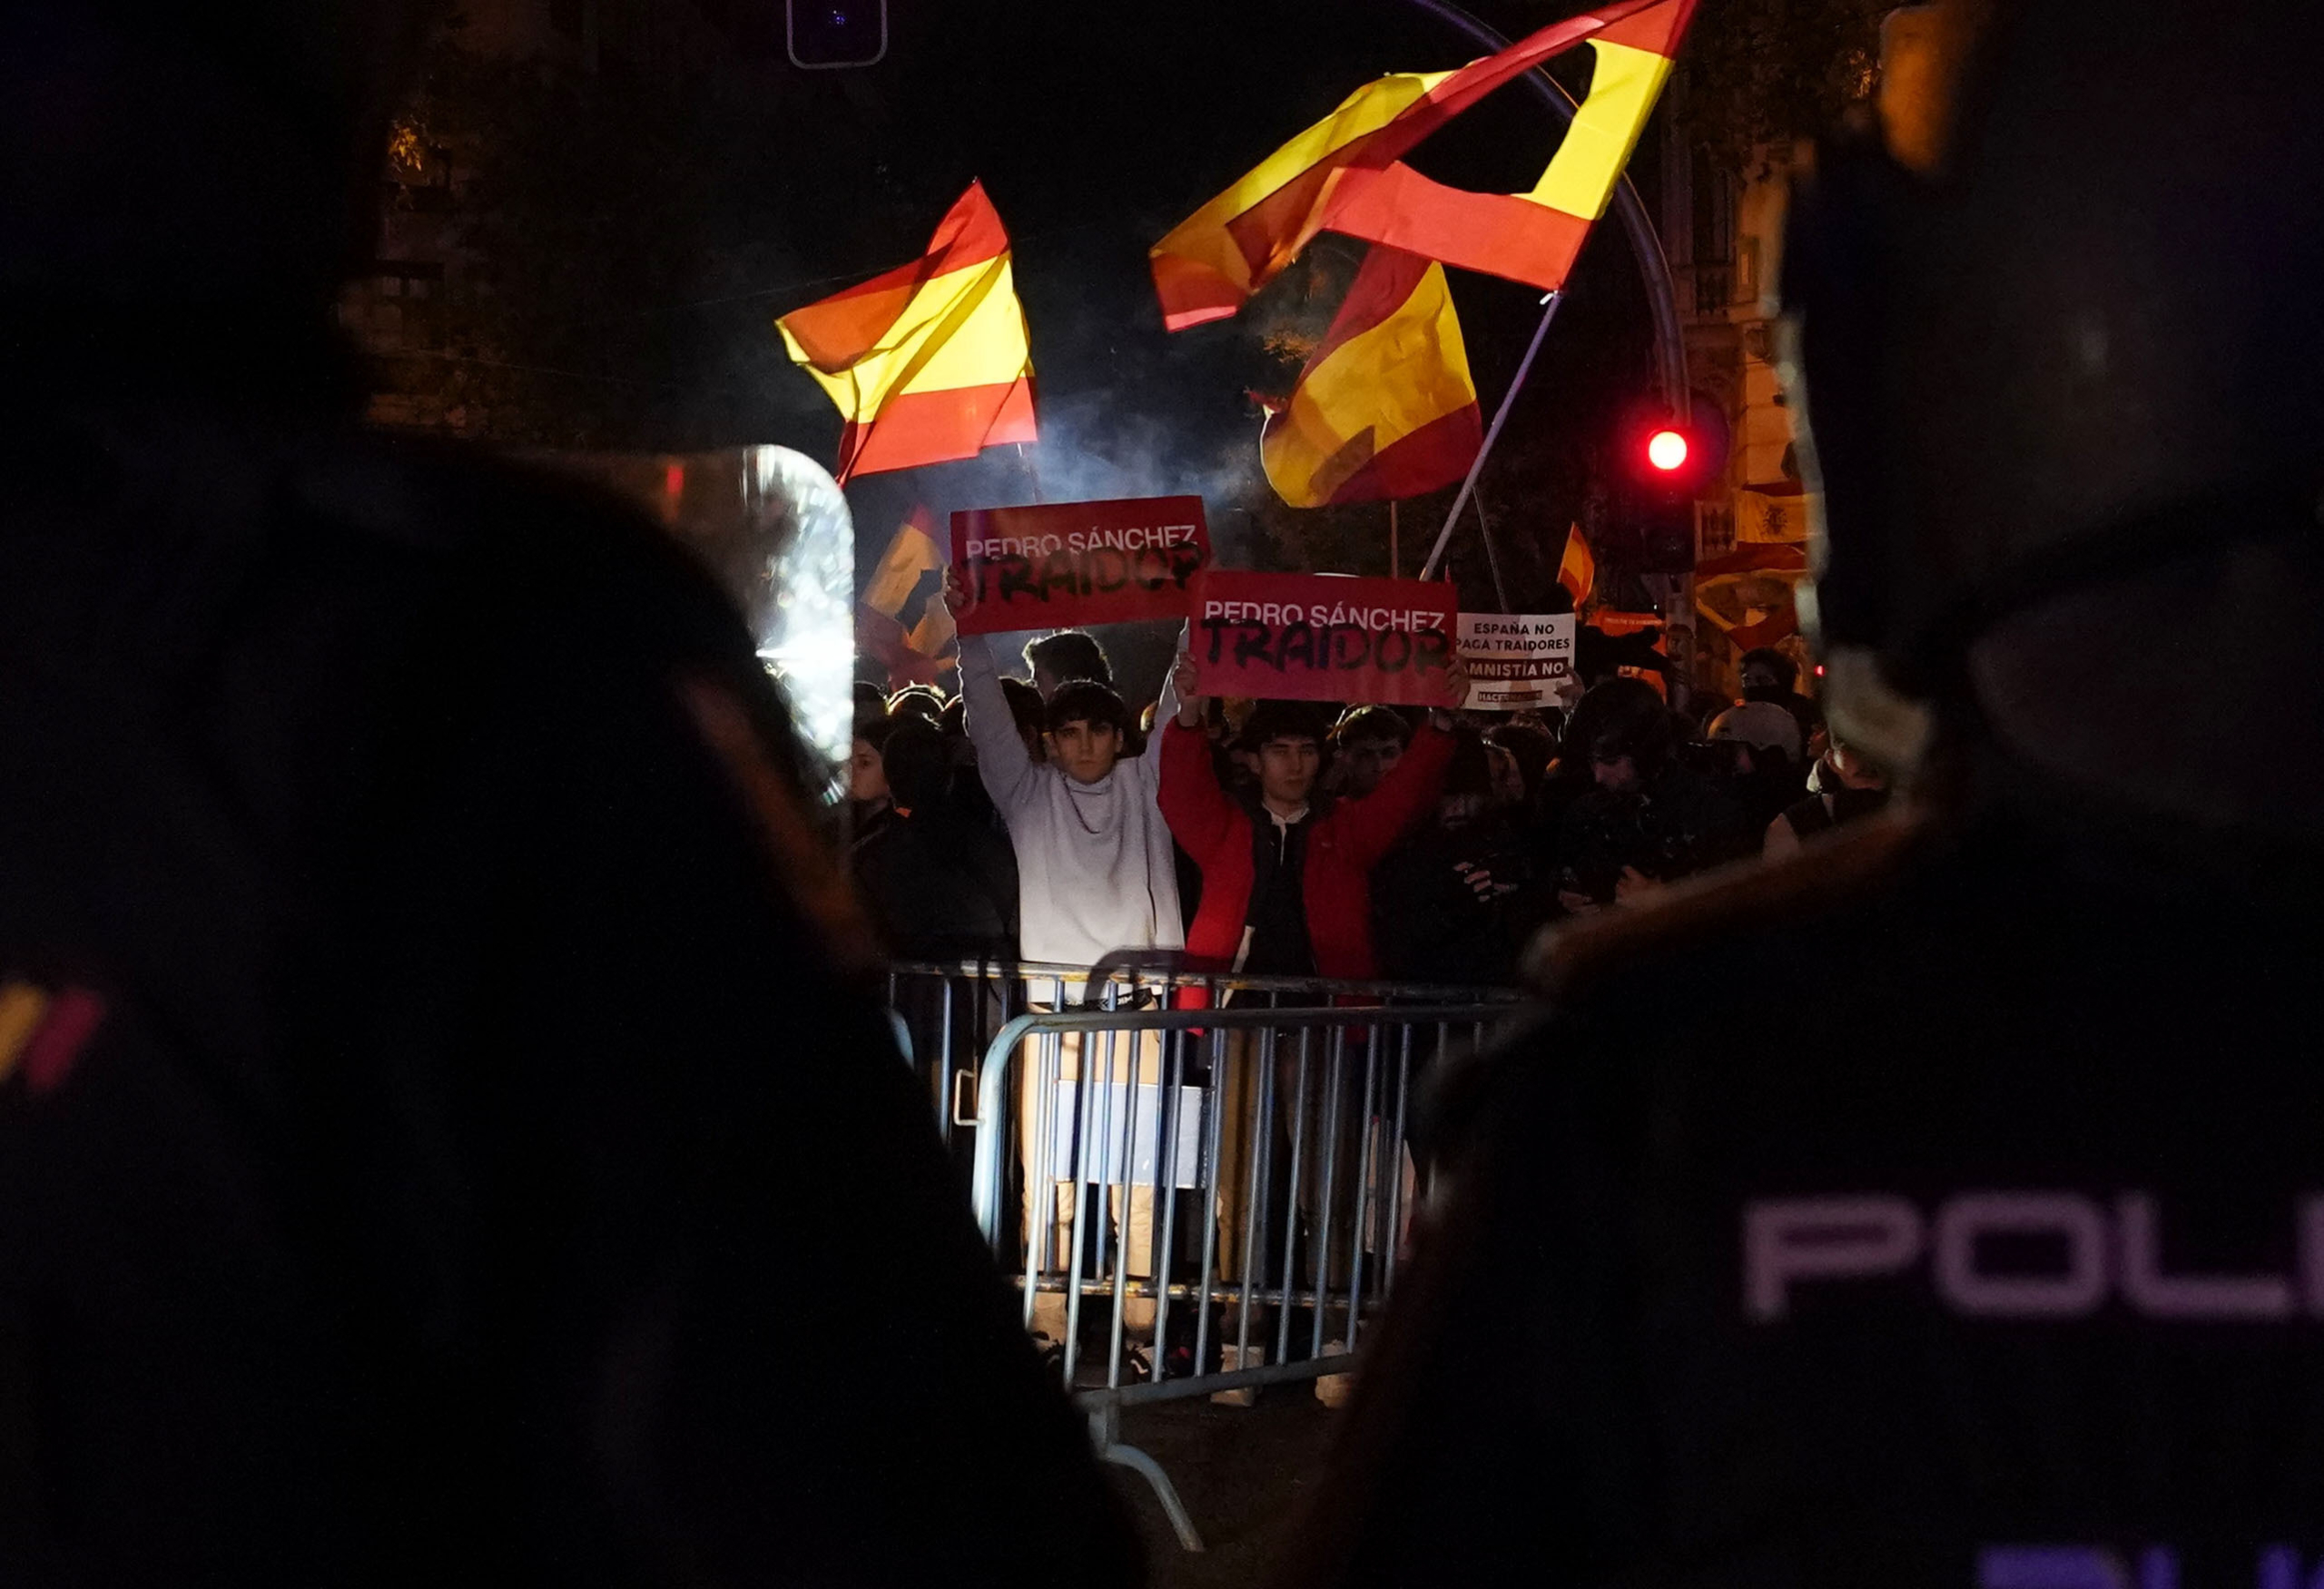 Demonstrators gather to protest against the amnesty at the headquarters of Socialist party in Madrid, Spain, Thursday, Nov. 9, 2023. Protests backed by Vox party turned on Thursday night as Spain's Socialists to grant amnesty to Catalan separatists in exchange for support of new government. (AP Photo/Andrea Comas)